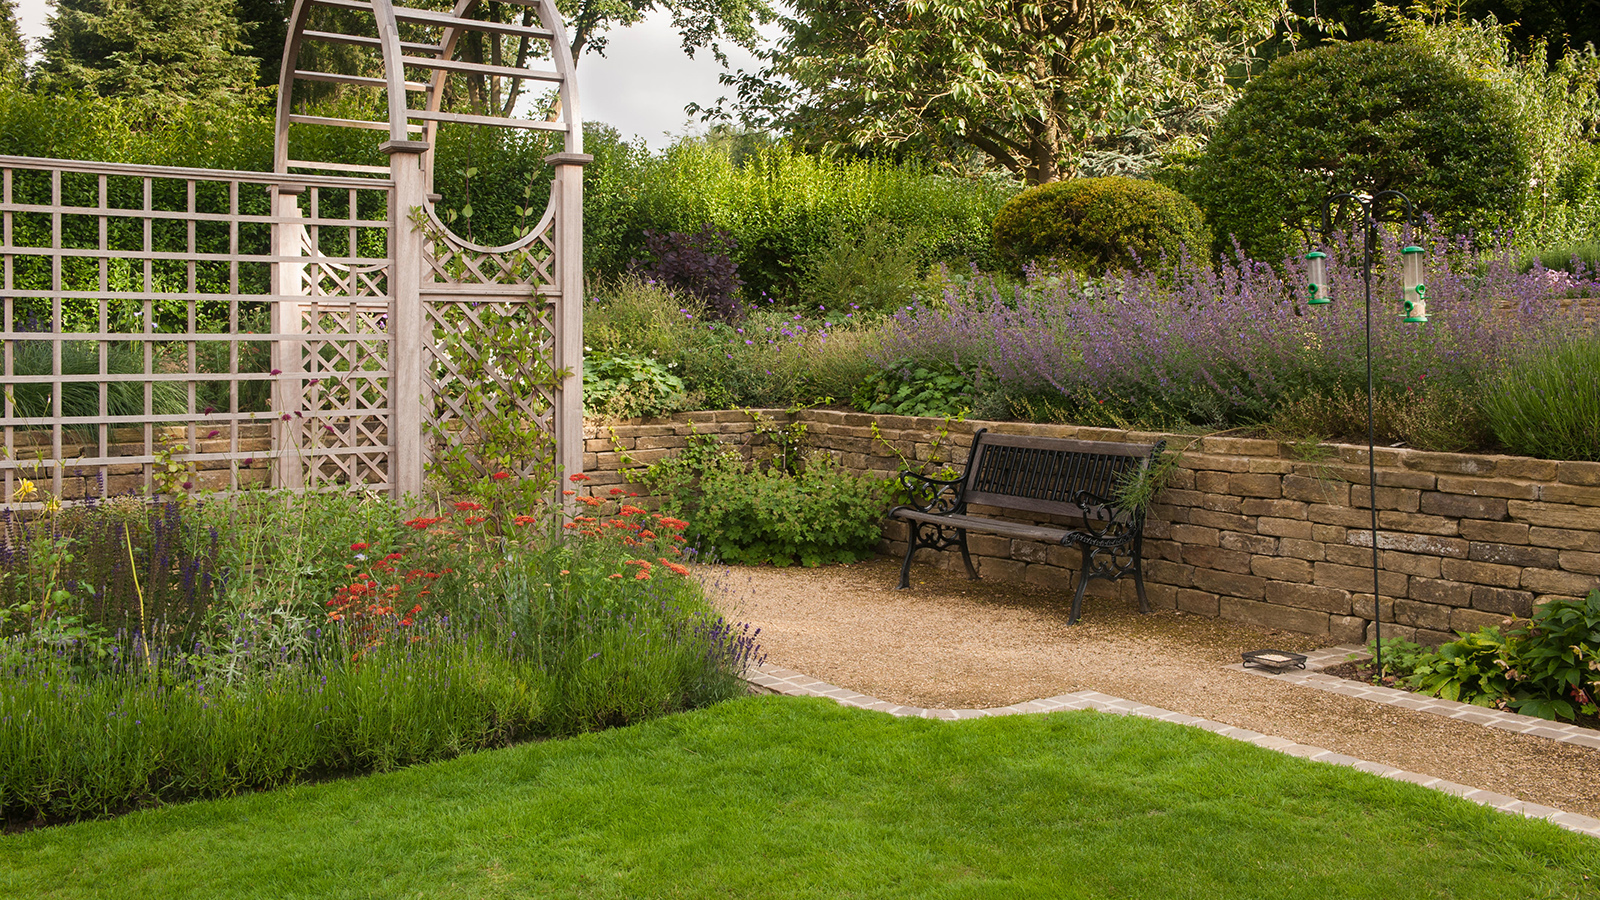 Lawn edging ideas: 11 ways to finish your lawn in style